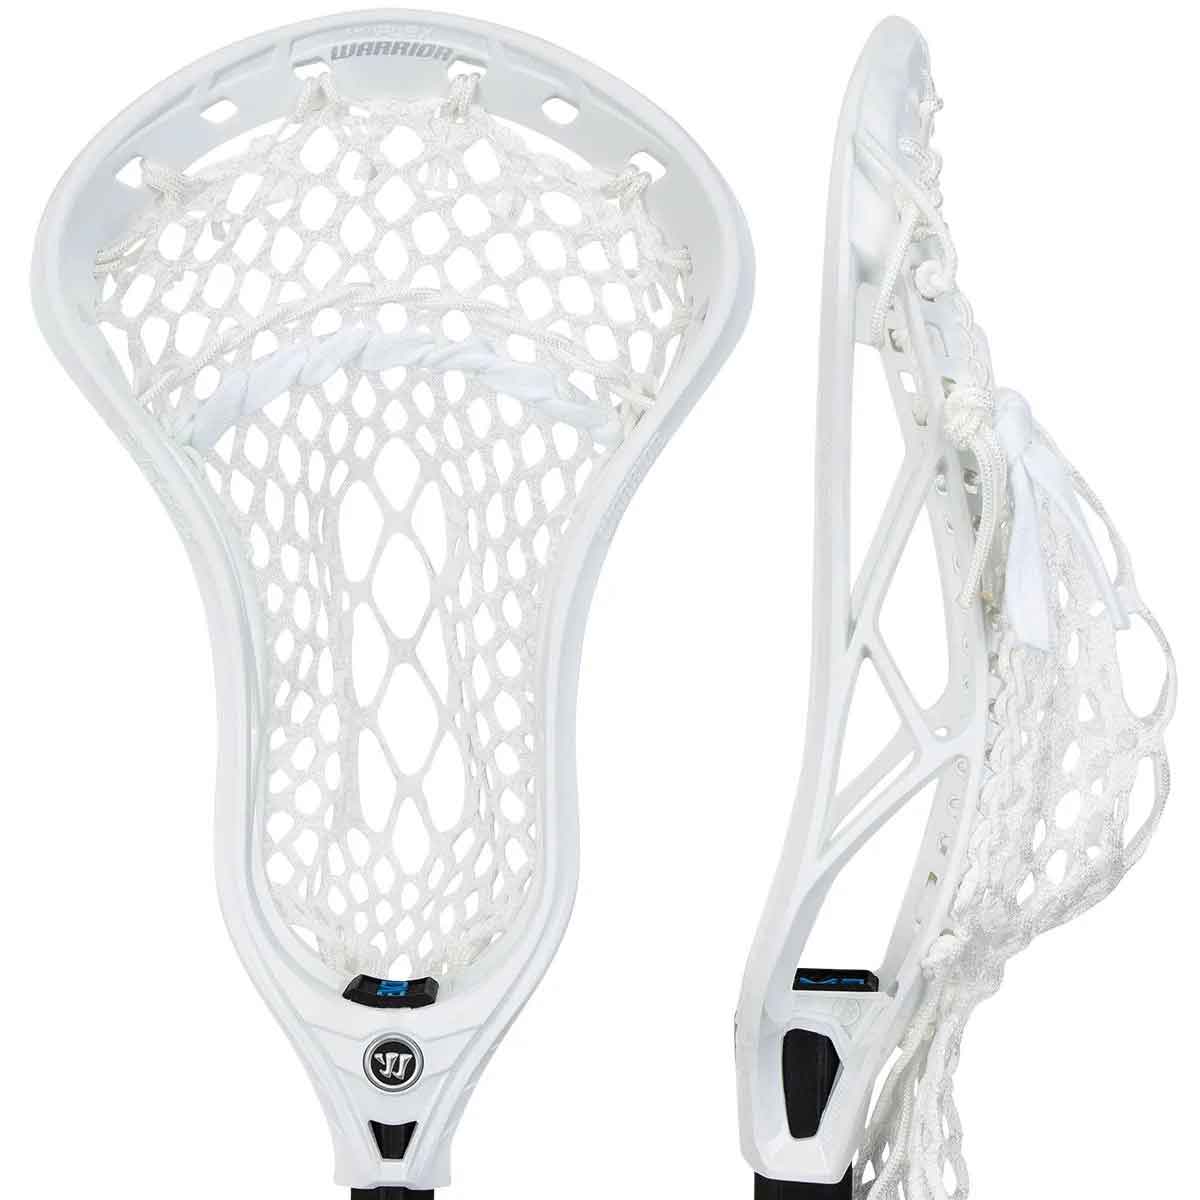 Picture of the white Warrior EVO QX2-O ISO Warp Strung Offense Lacrosse Head